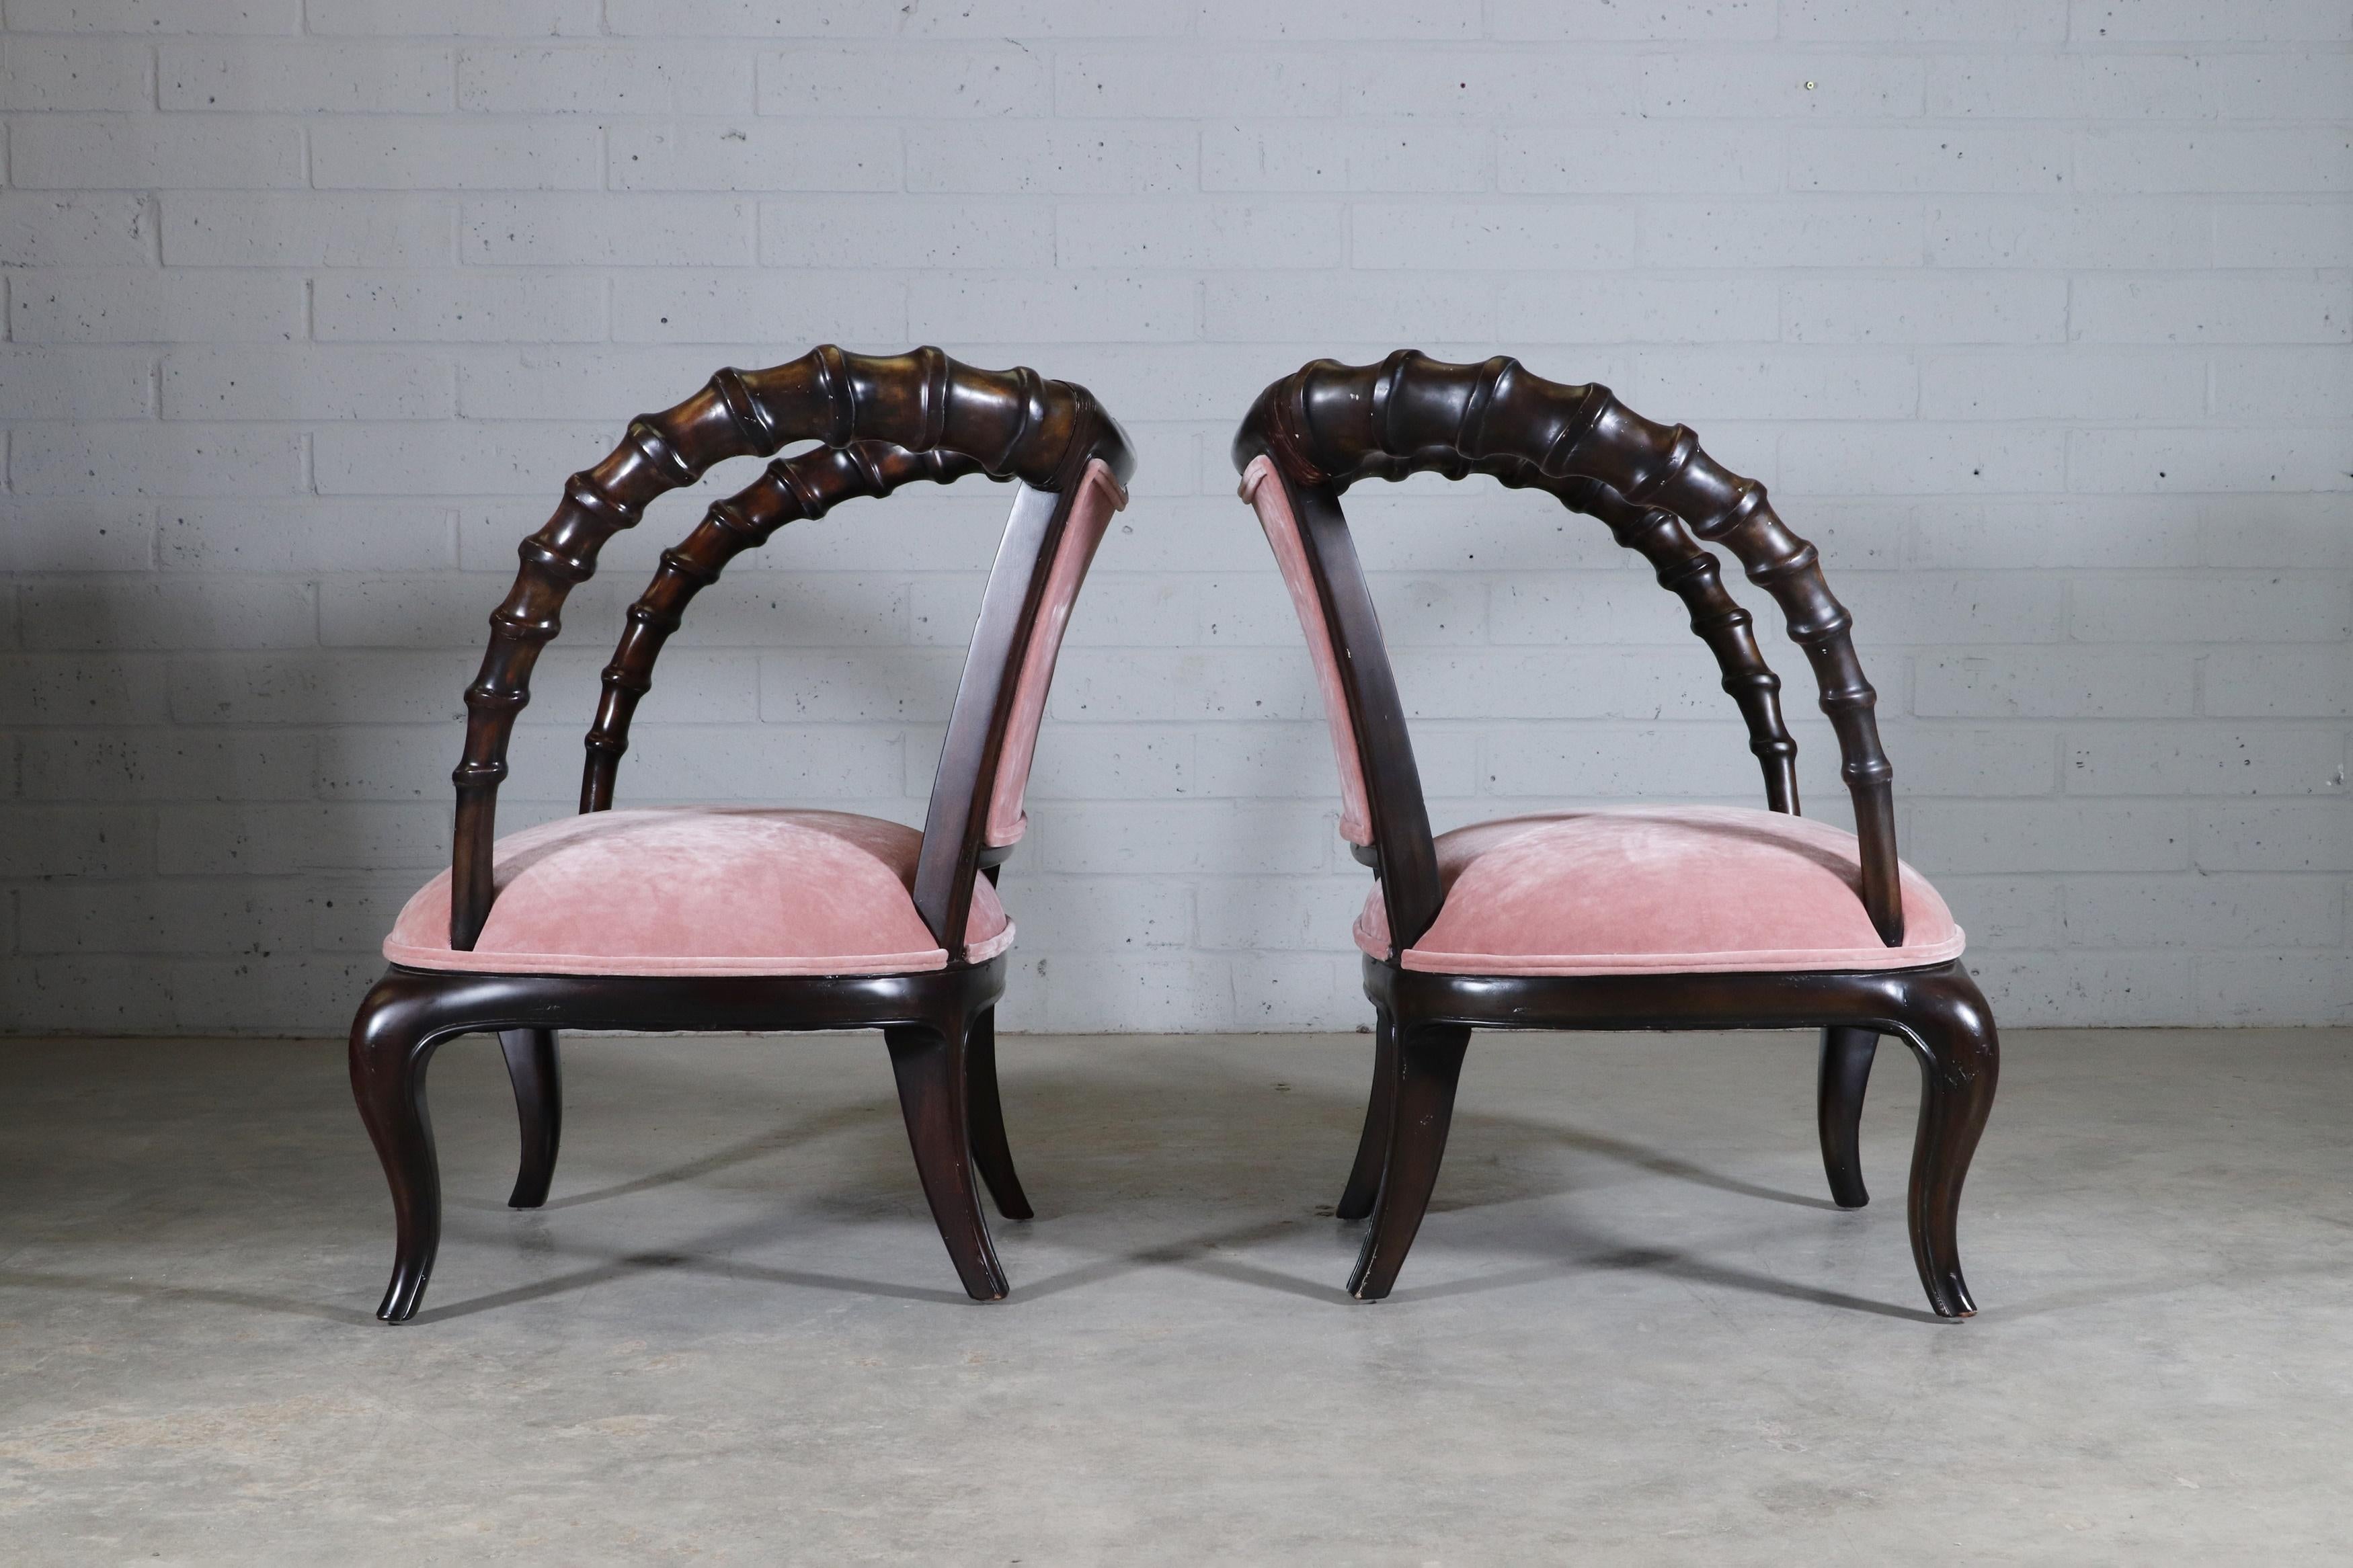 A pair of Thomasville 'Ernest Hemingway' carved alder armchairs
modern, each with armrests carved in the manner of antelope antlers, upholstered in sumptuous blush velvet. 

Provenance: 
Private Collection, UK
